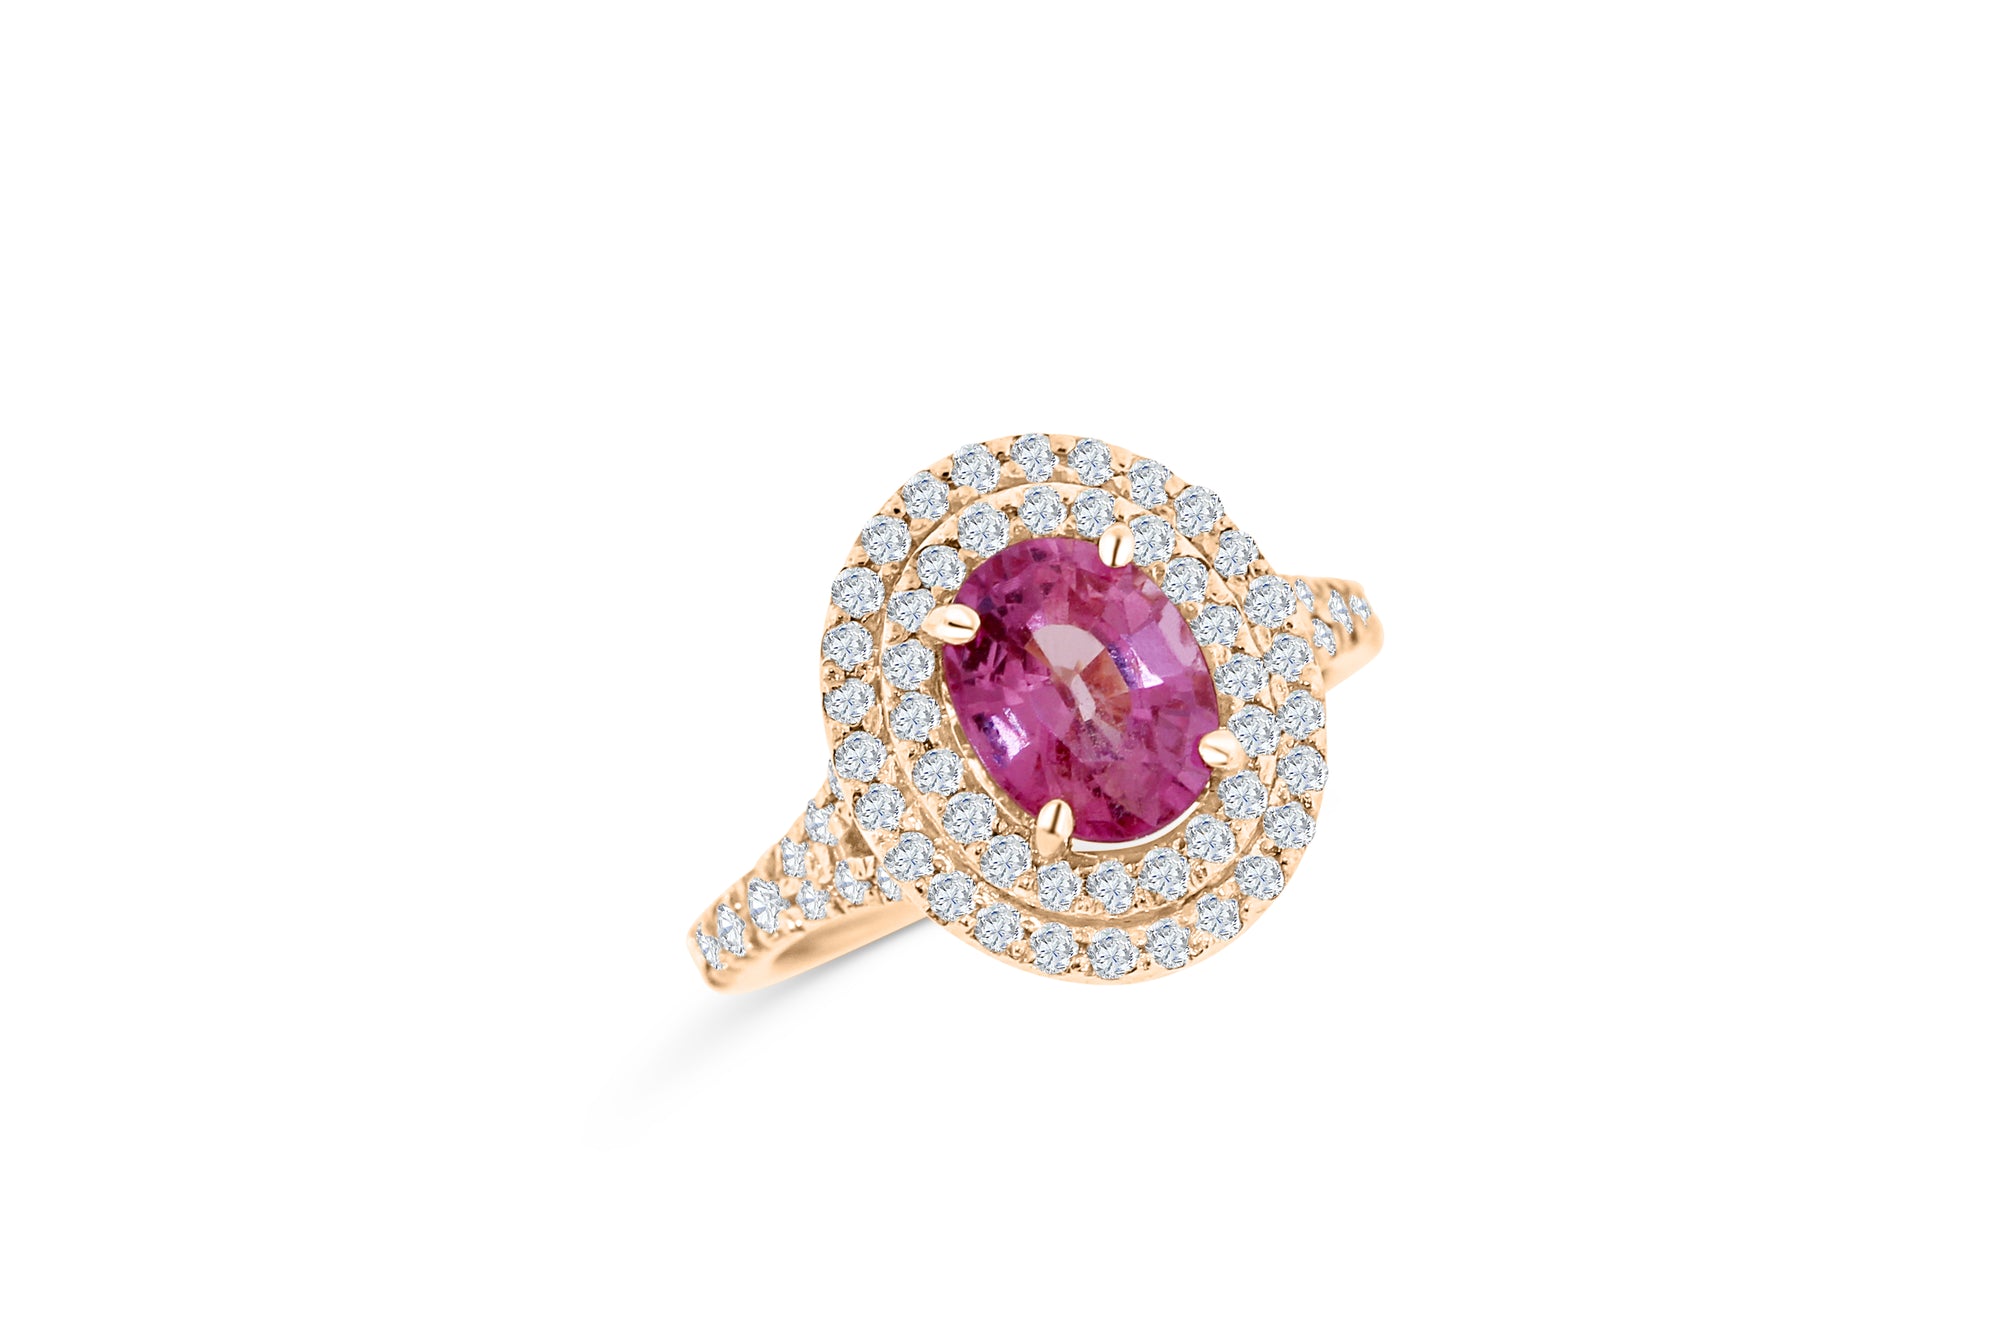 1.85 CT Oval Pink Sapphire Diamond Ring 0.68 CT TW 14K Rose Gold PSR001 - NorthandSouthJewelry